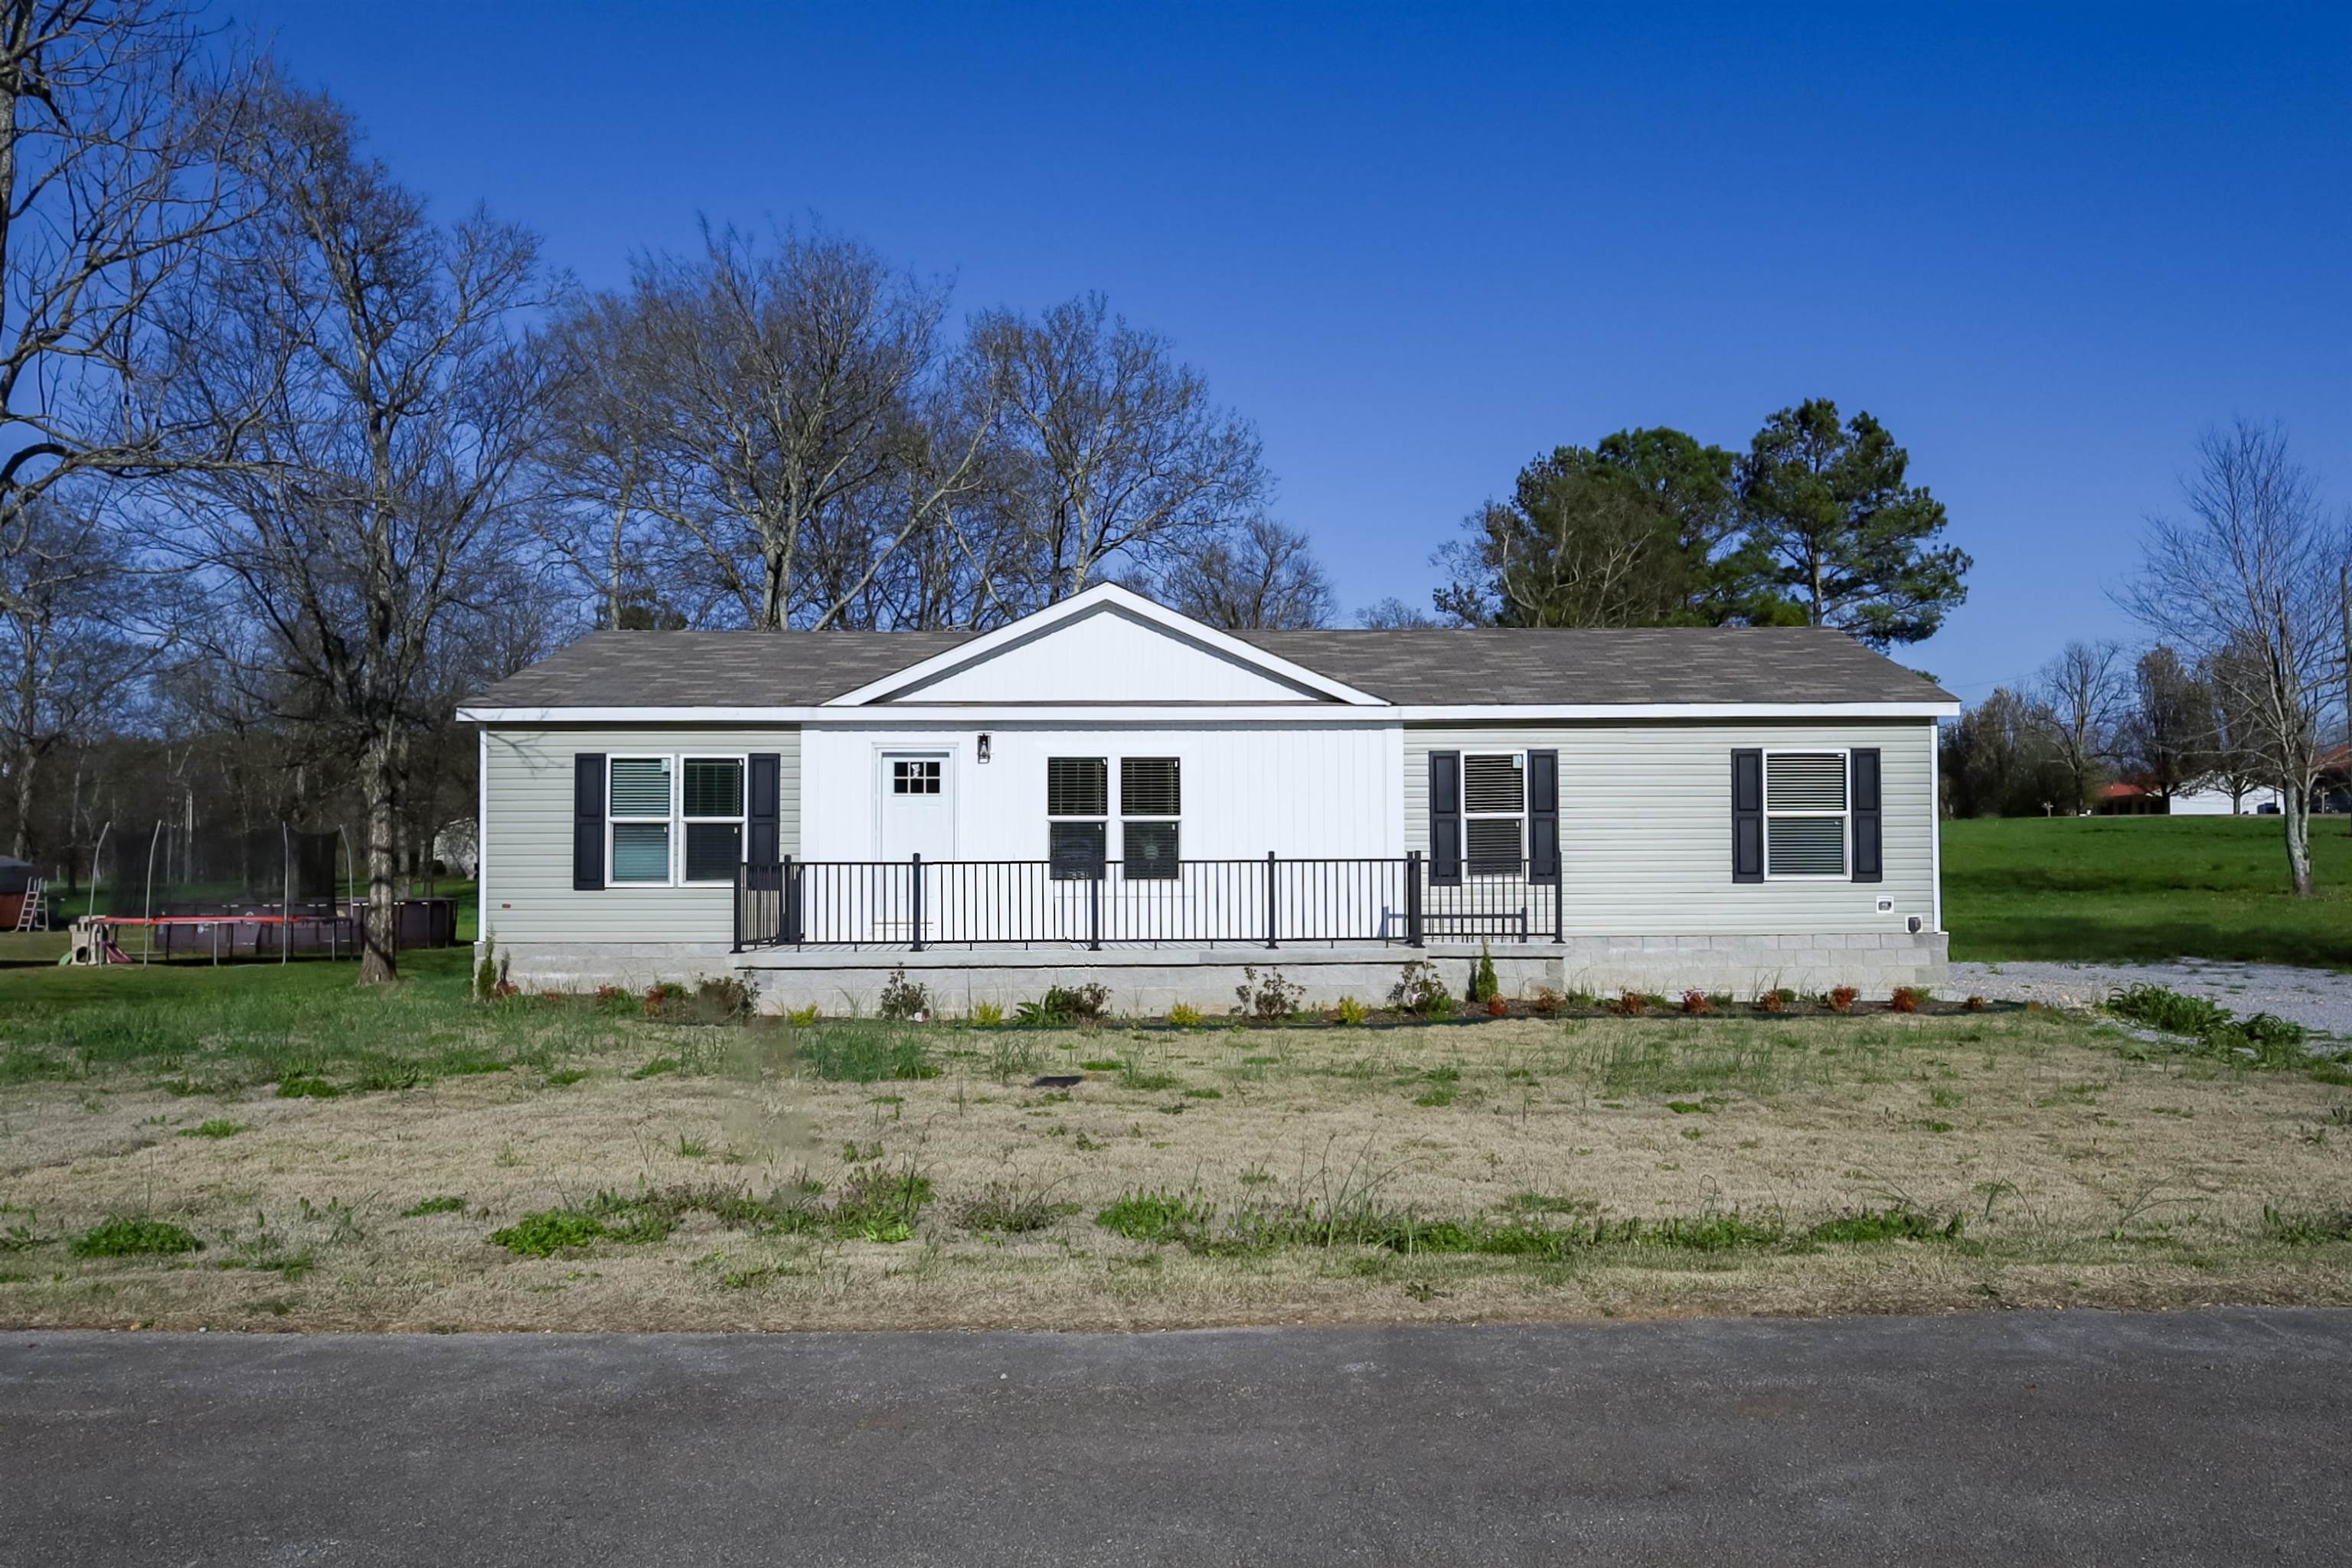 Welcome Home.  Located in Deer run Sub. in Russellville City limits.  Lets take a look at this adorable 3 bedroom/ 2 bath modular home.  You'll love the zoysia sod landscaping.  You have plenty space in the leveled front and backyard.  You've also got a concrete front porch, side porch and back porch.  Now to the inside, you've got brand-new stainless-steel Frigidaire appliances and all the furnishings inside the home will stay with the buyers at no extra cost.  WOW! Open floor plan, spacious bathrooms and private dining area.  Can you say move in ready.  Possible owner financing available.  Hablo Espanol posiblemente financiado de dueno a dueno.  llameme hoy.